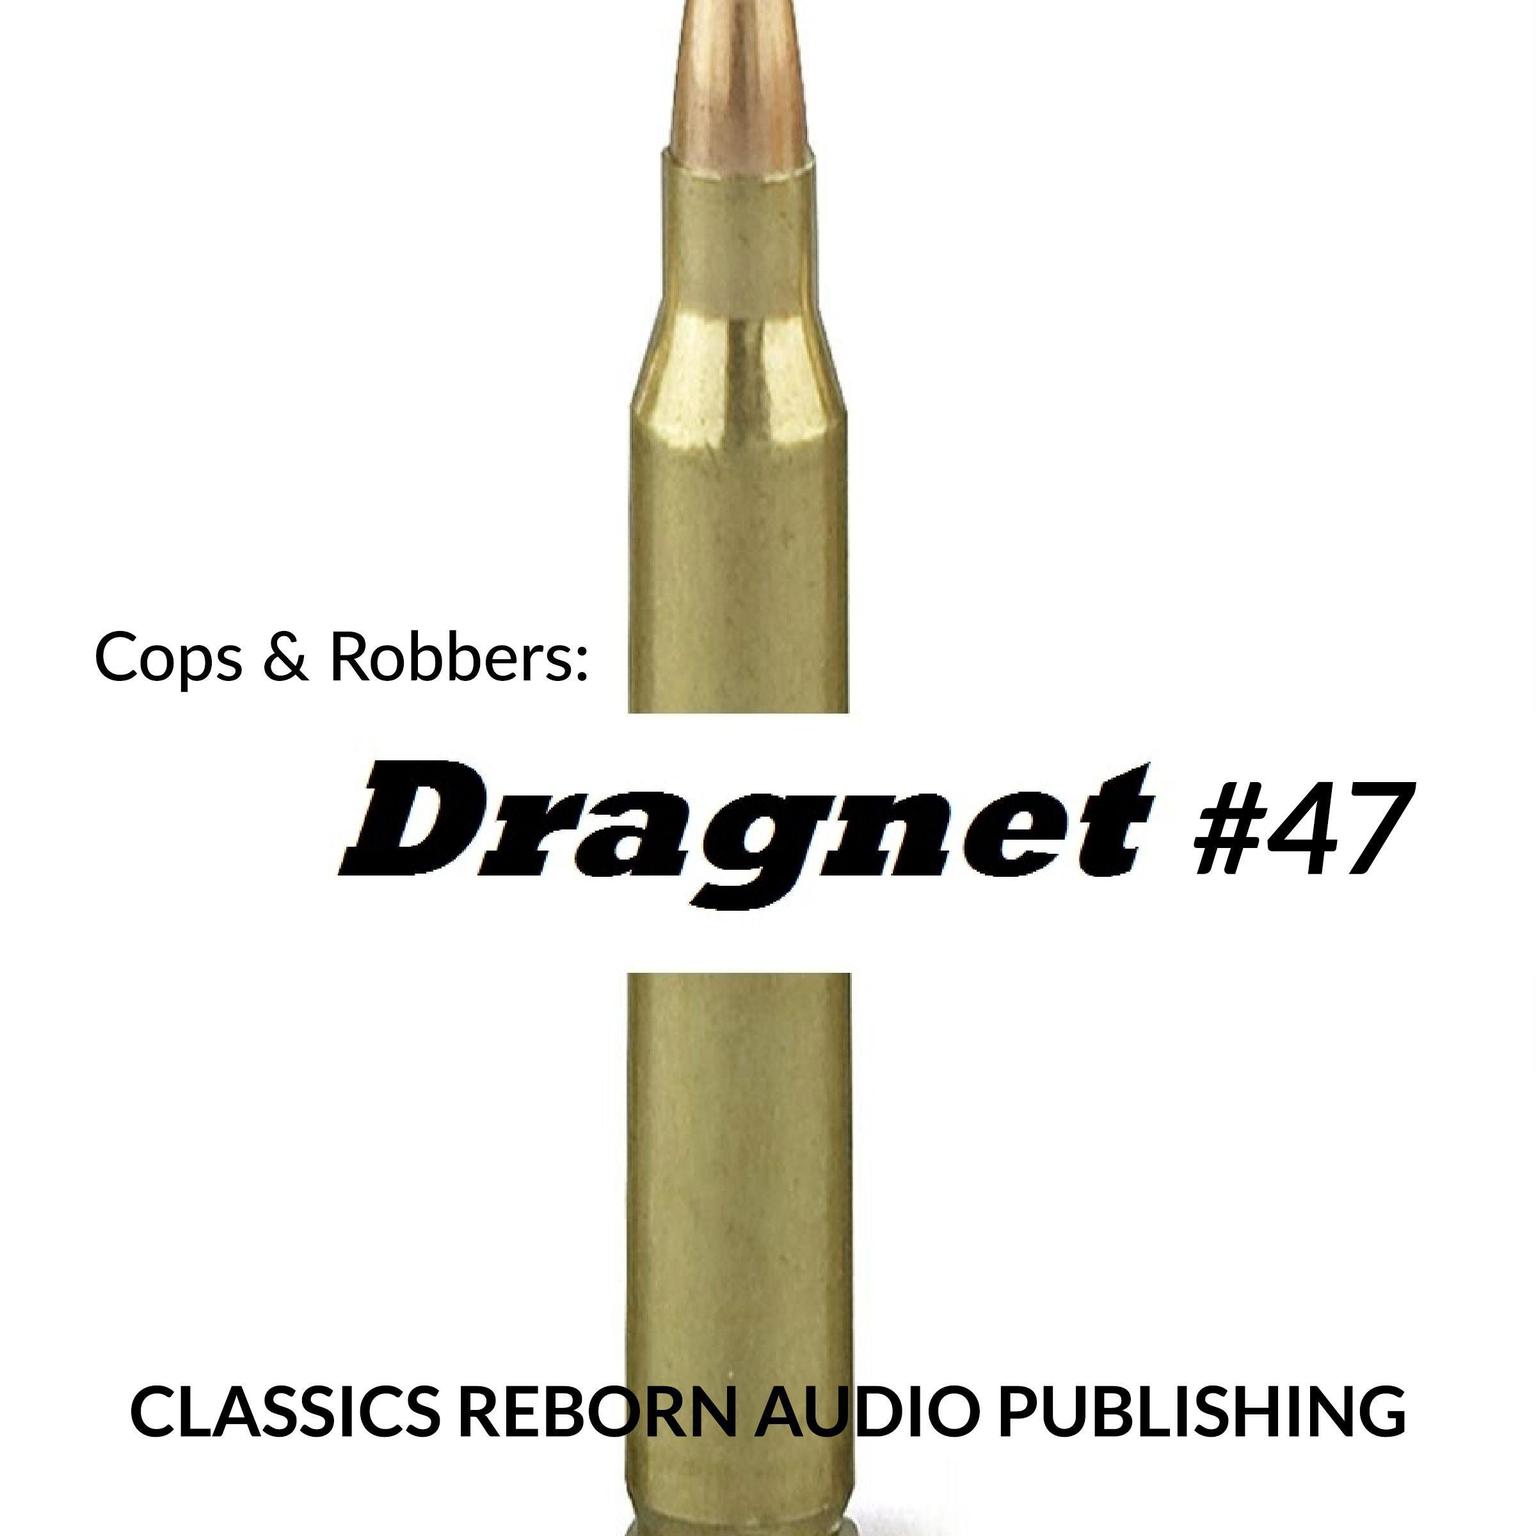 Cops & Robbers: Dragnet #47 Audiobook, by Classics Reborn Audio Publishing